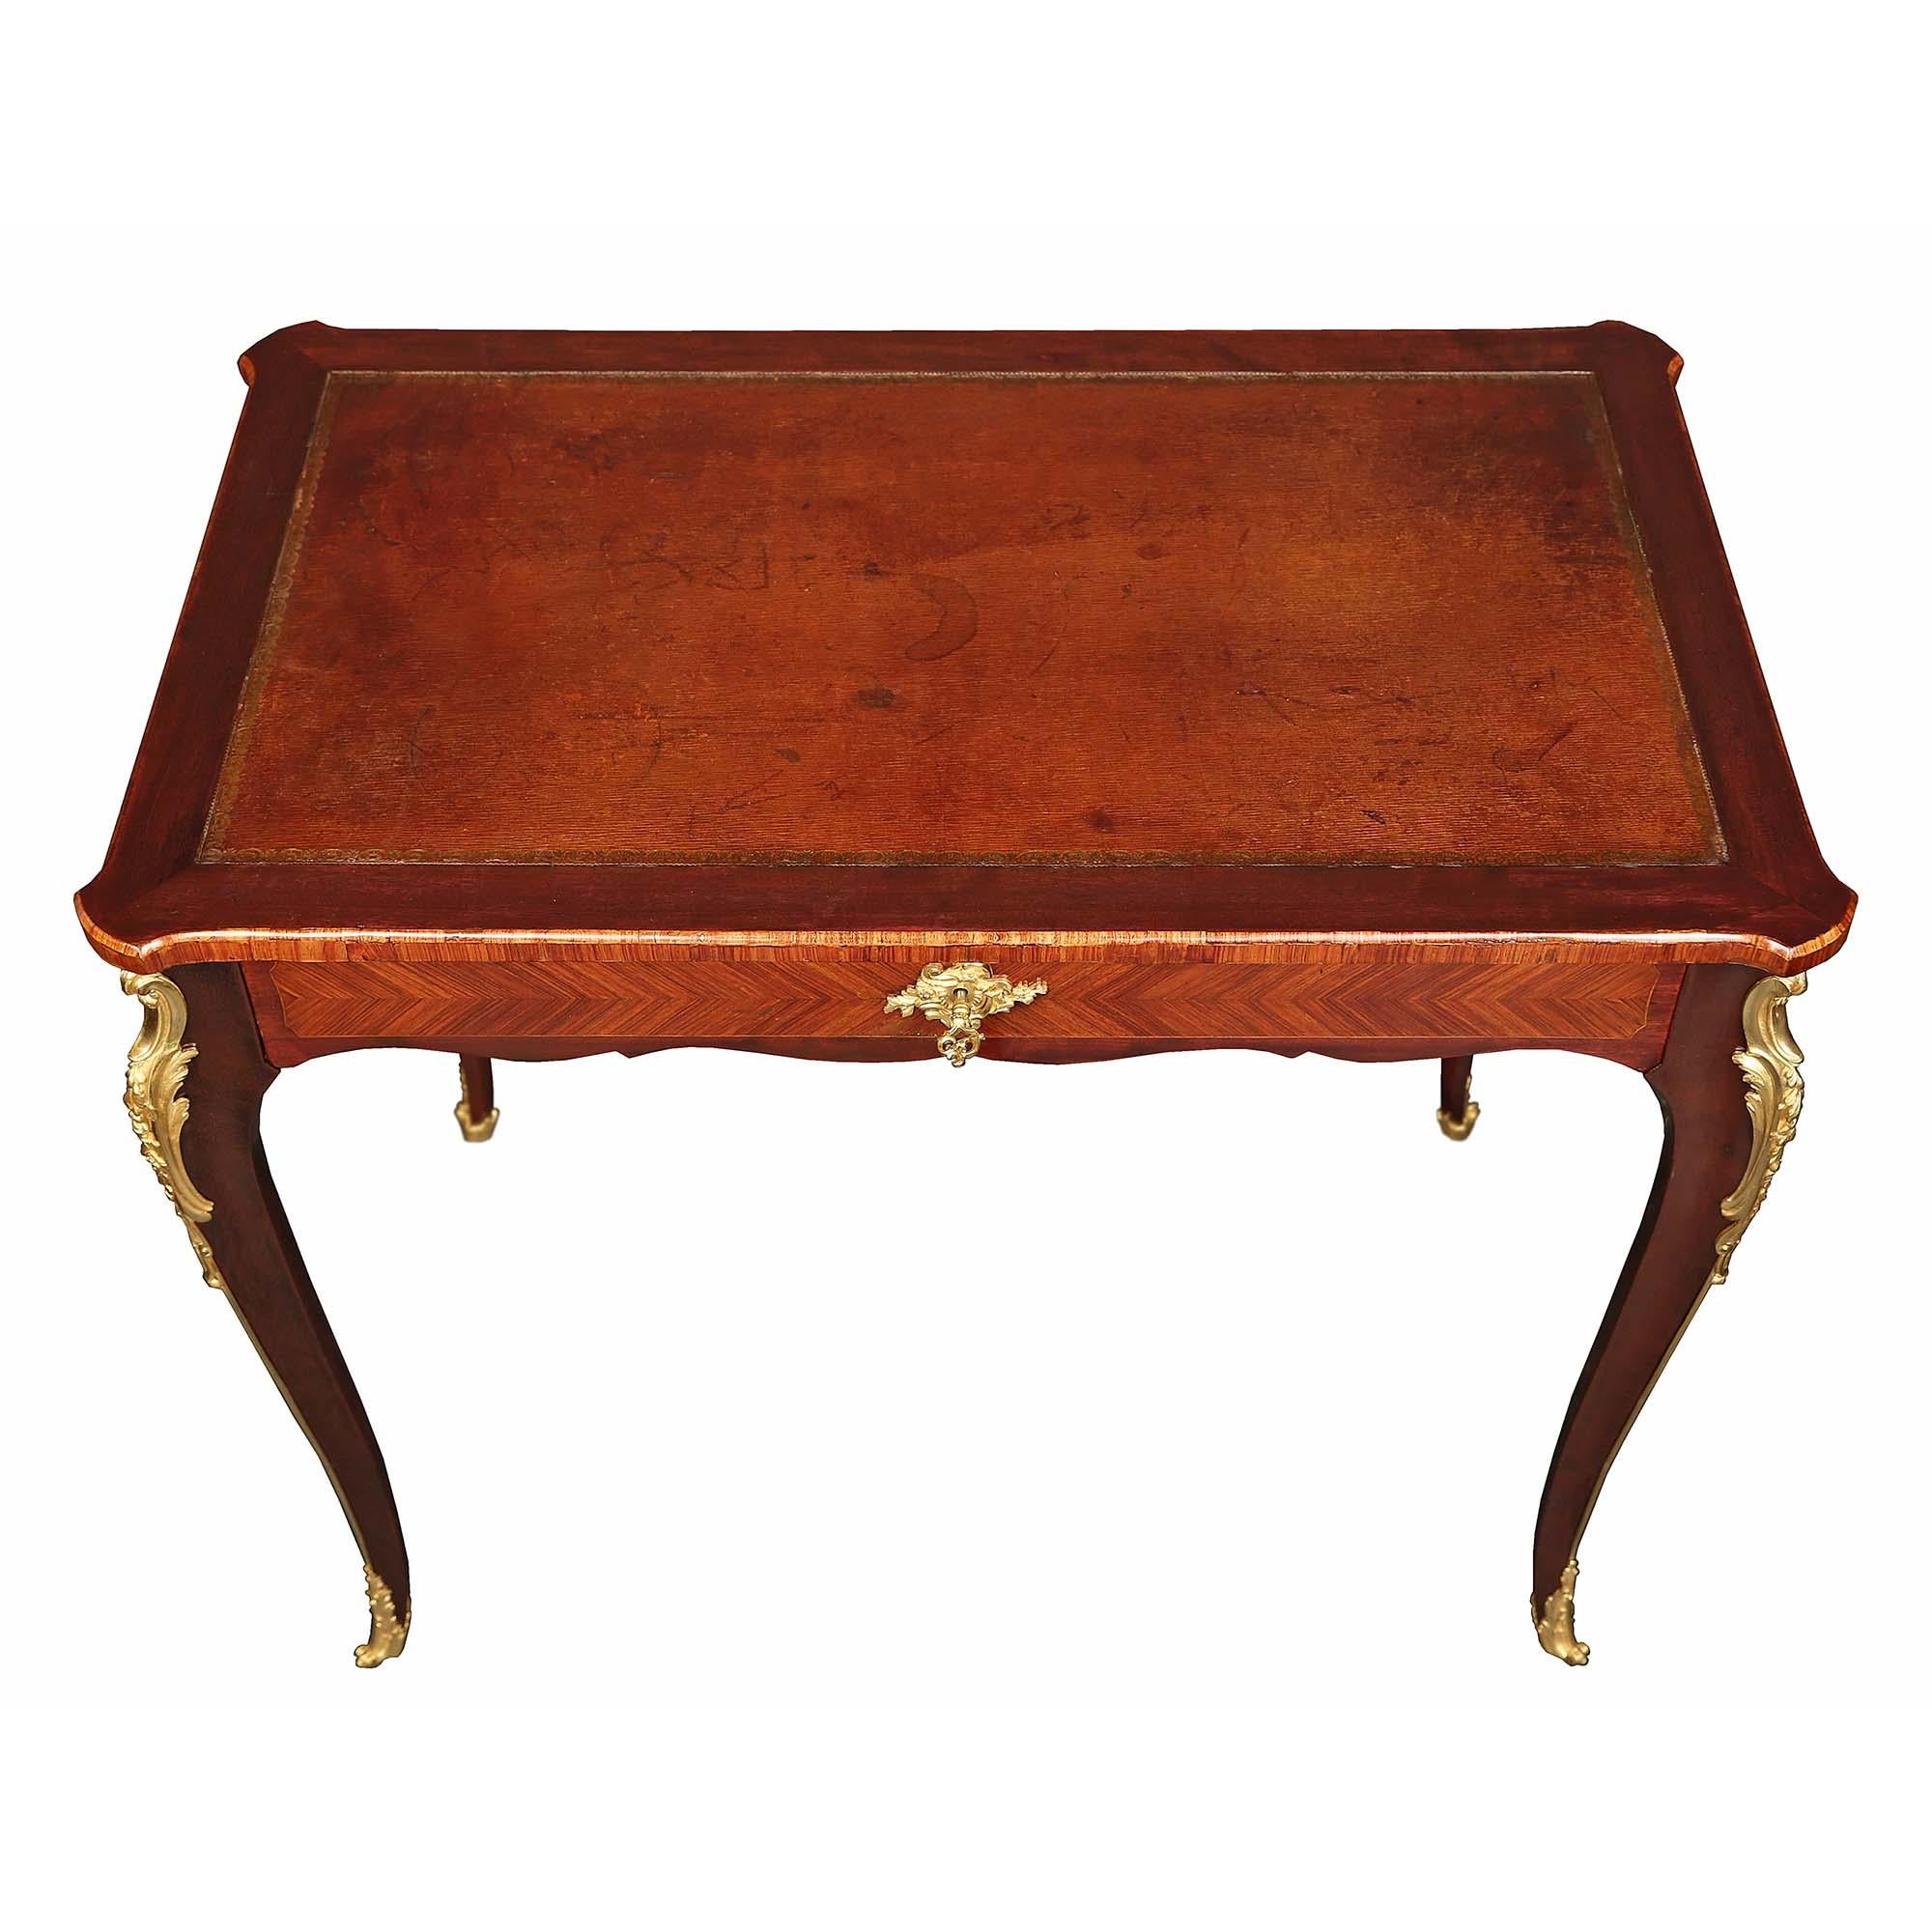 An elegant French 19th century Louis XV st. mahogany one drawer desk. The desk is raised by four slender, elegant cabriole legs with highly chased ormolu foliate mounts at the top, chutes, and wrap-around sabots. The single wide drawer with inlaid